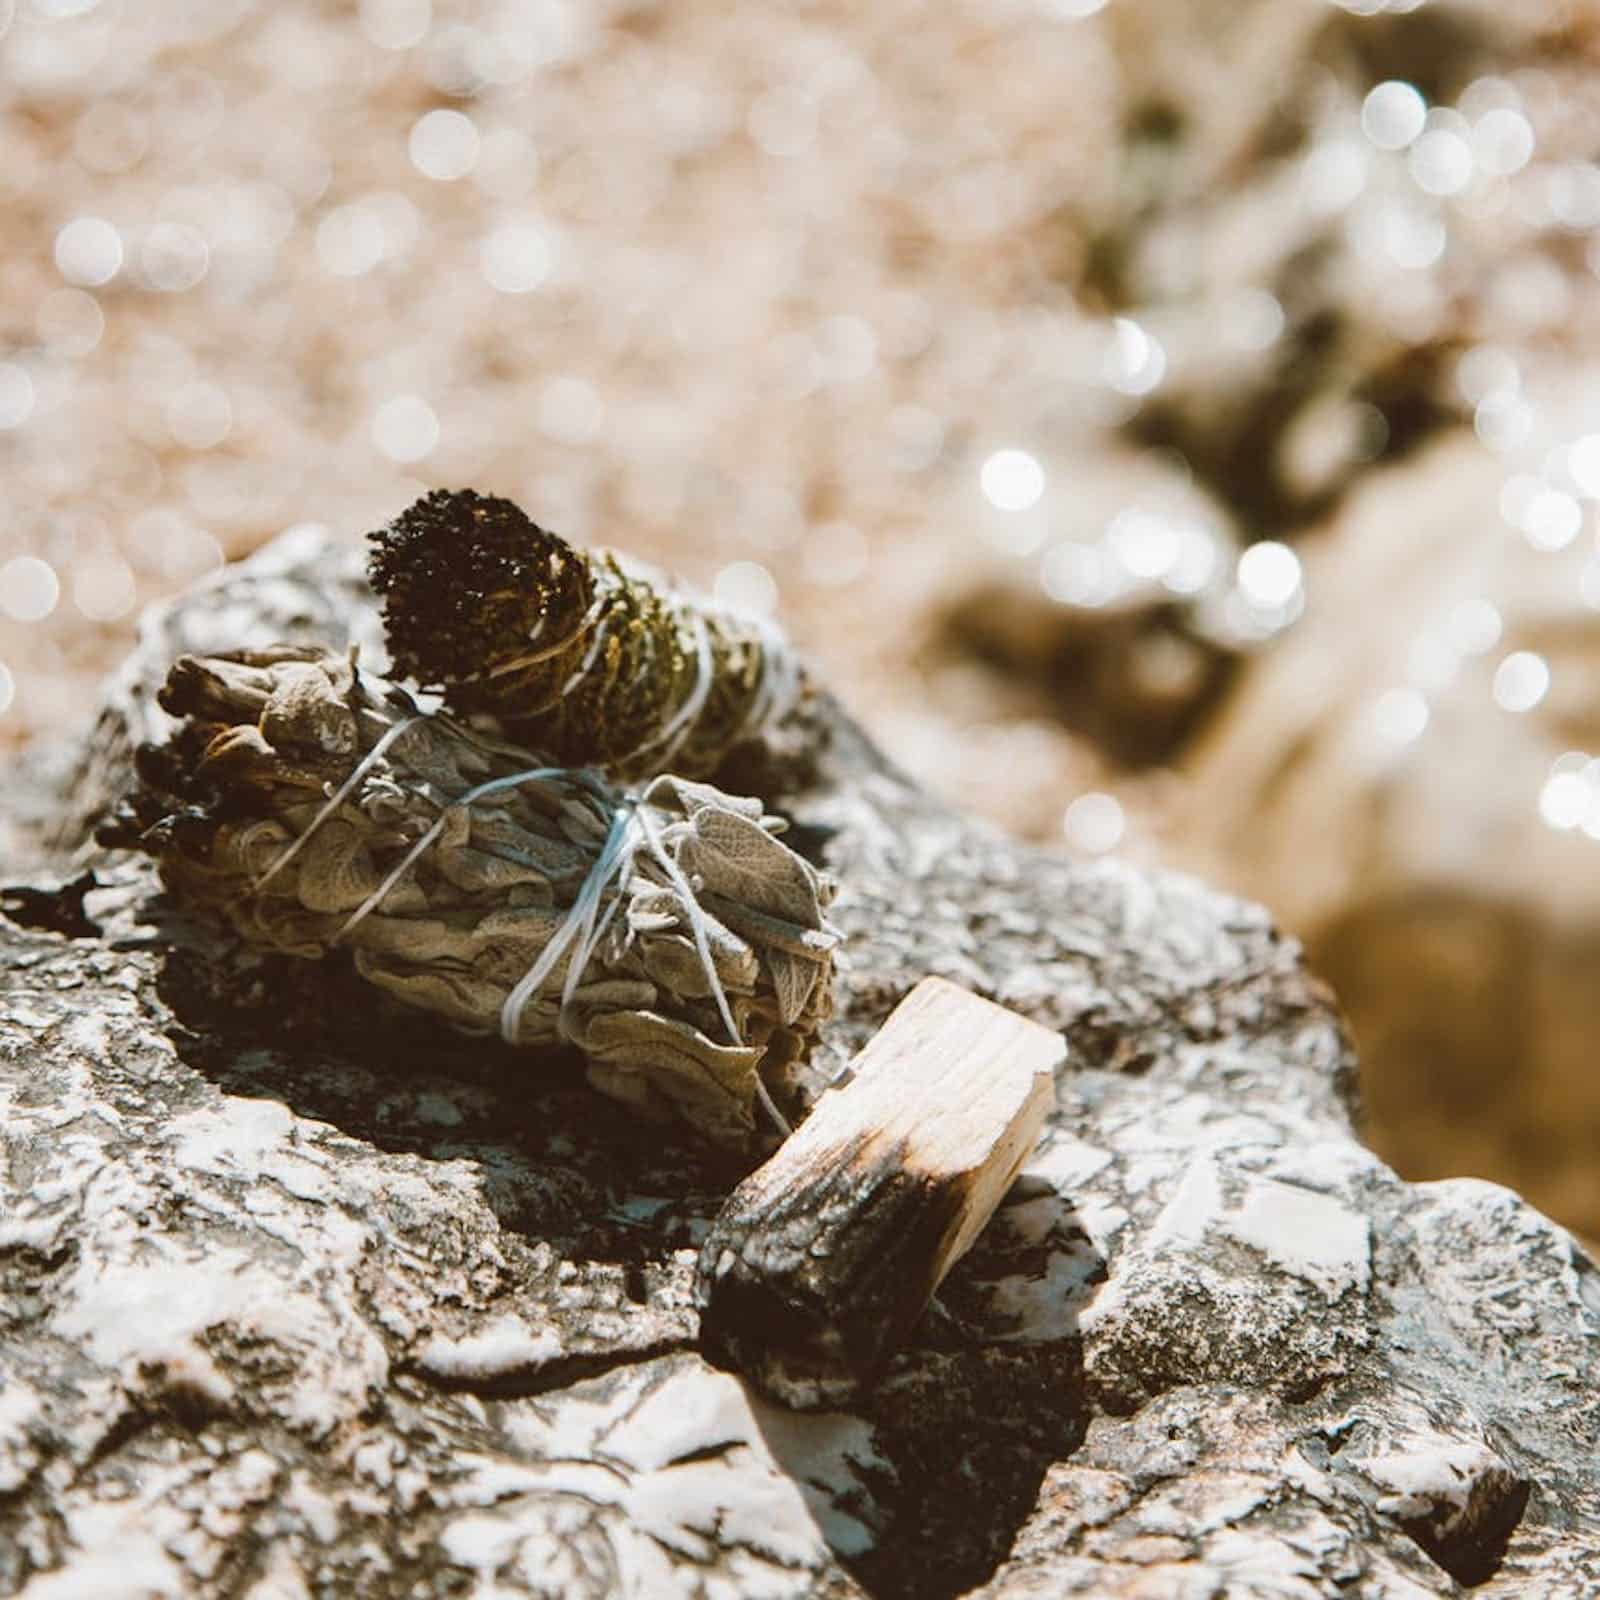 An image of sage smudge sticks and palo santo burning in the foreground on top of a rock.